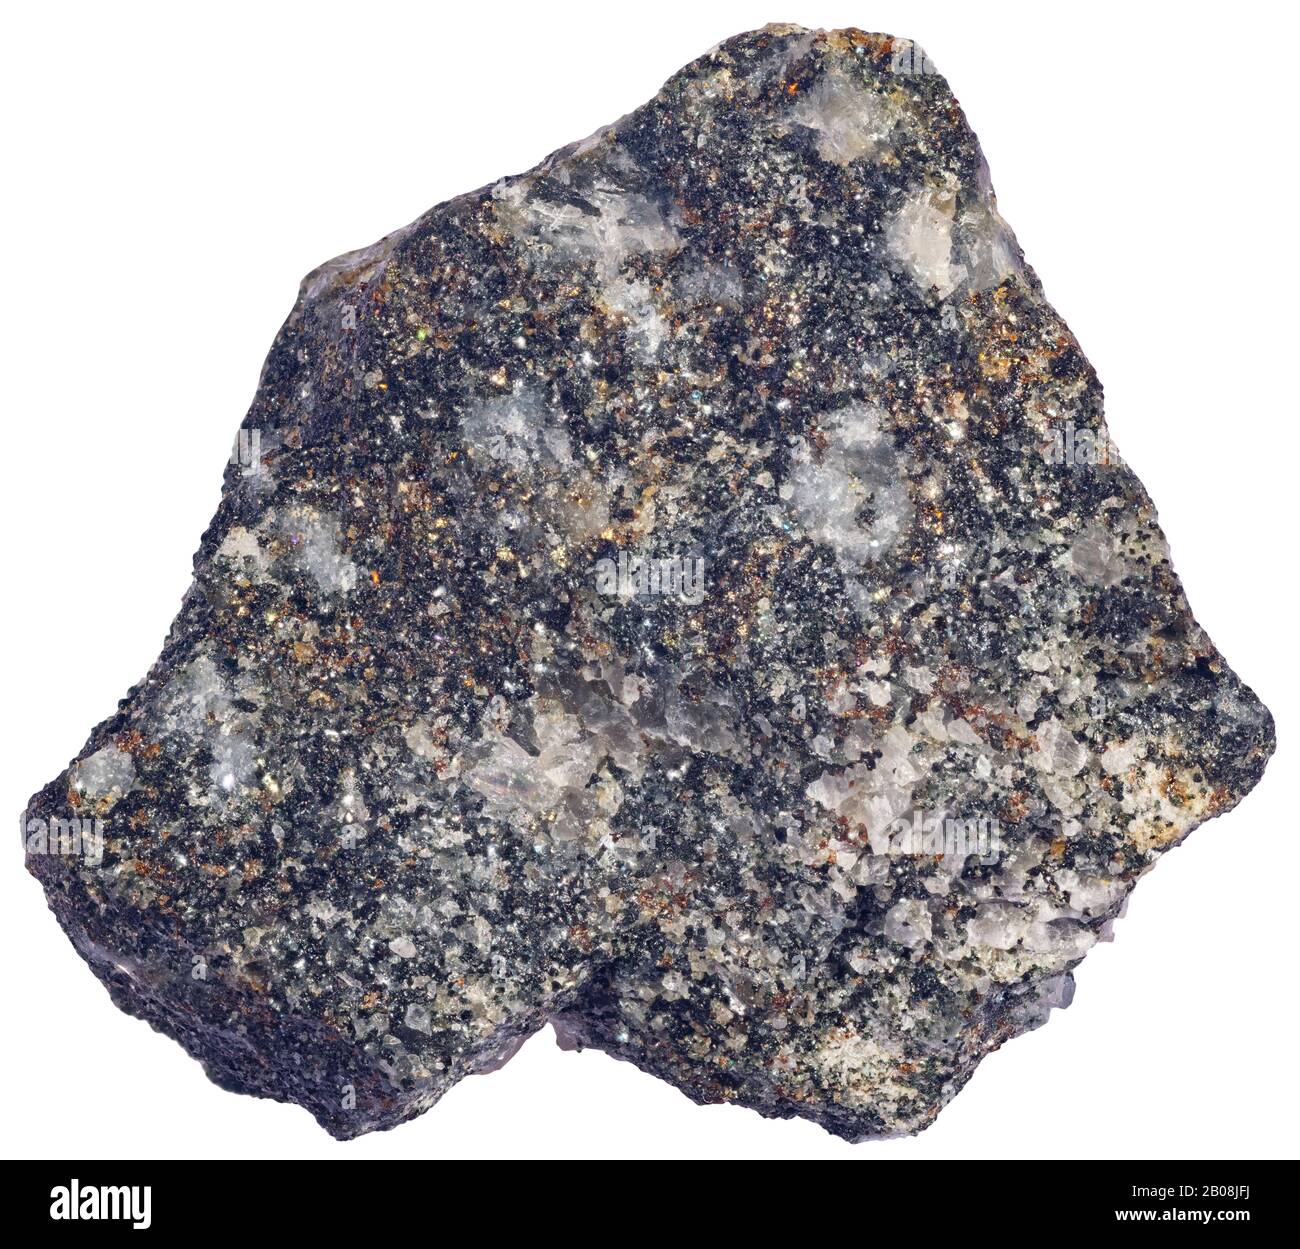 Porphyry, Igneous, Drummondville, Quebec Porphyry is a textural term for an igneous rock consisting of large-grained crystals such as feldspar or quar Stock Photo